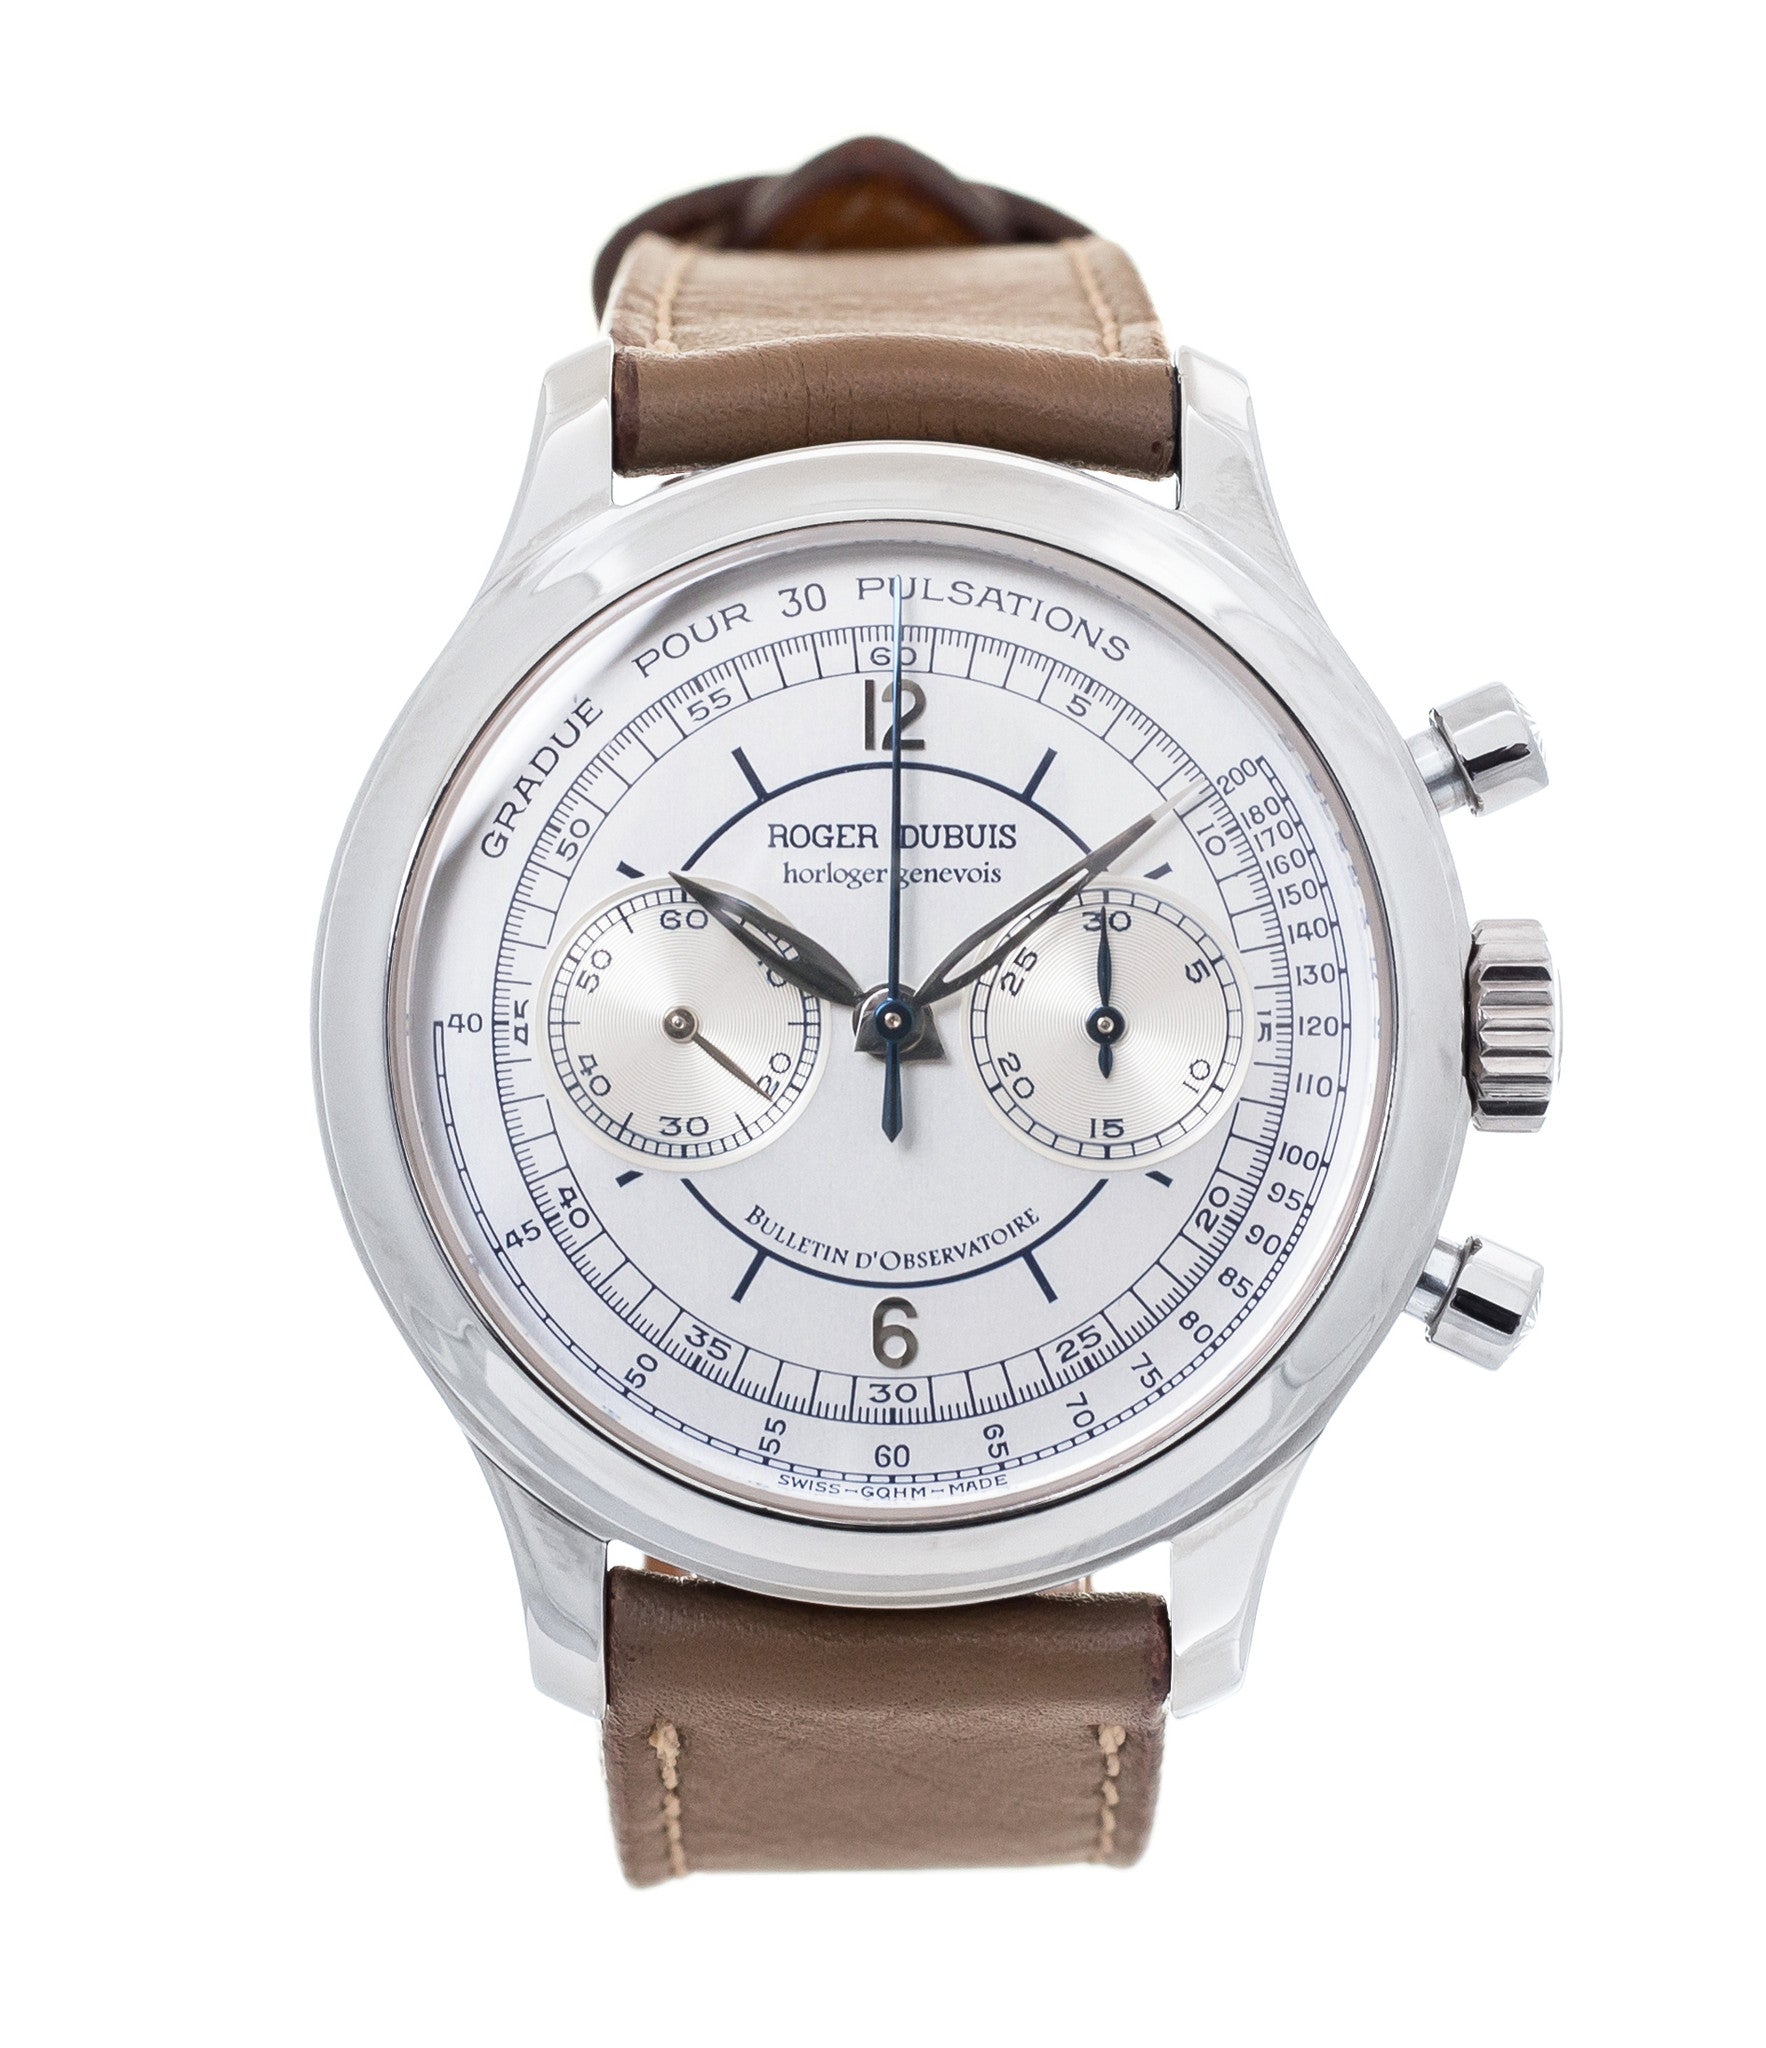 buy Roger Dubuis Hommage Chronograph early rare watch H37 560 online at a Collcted Man